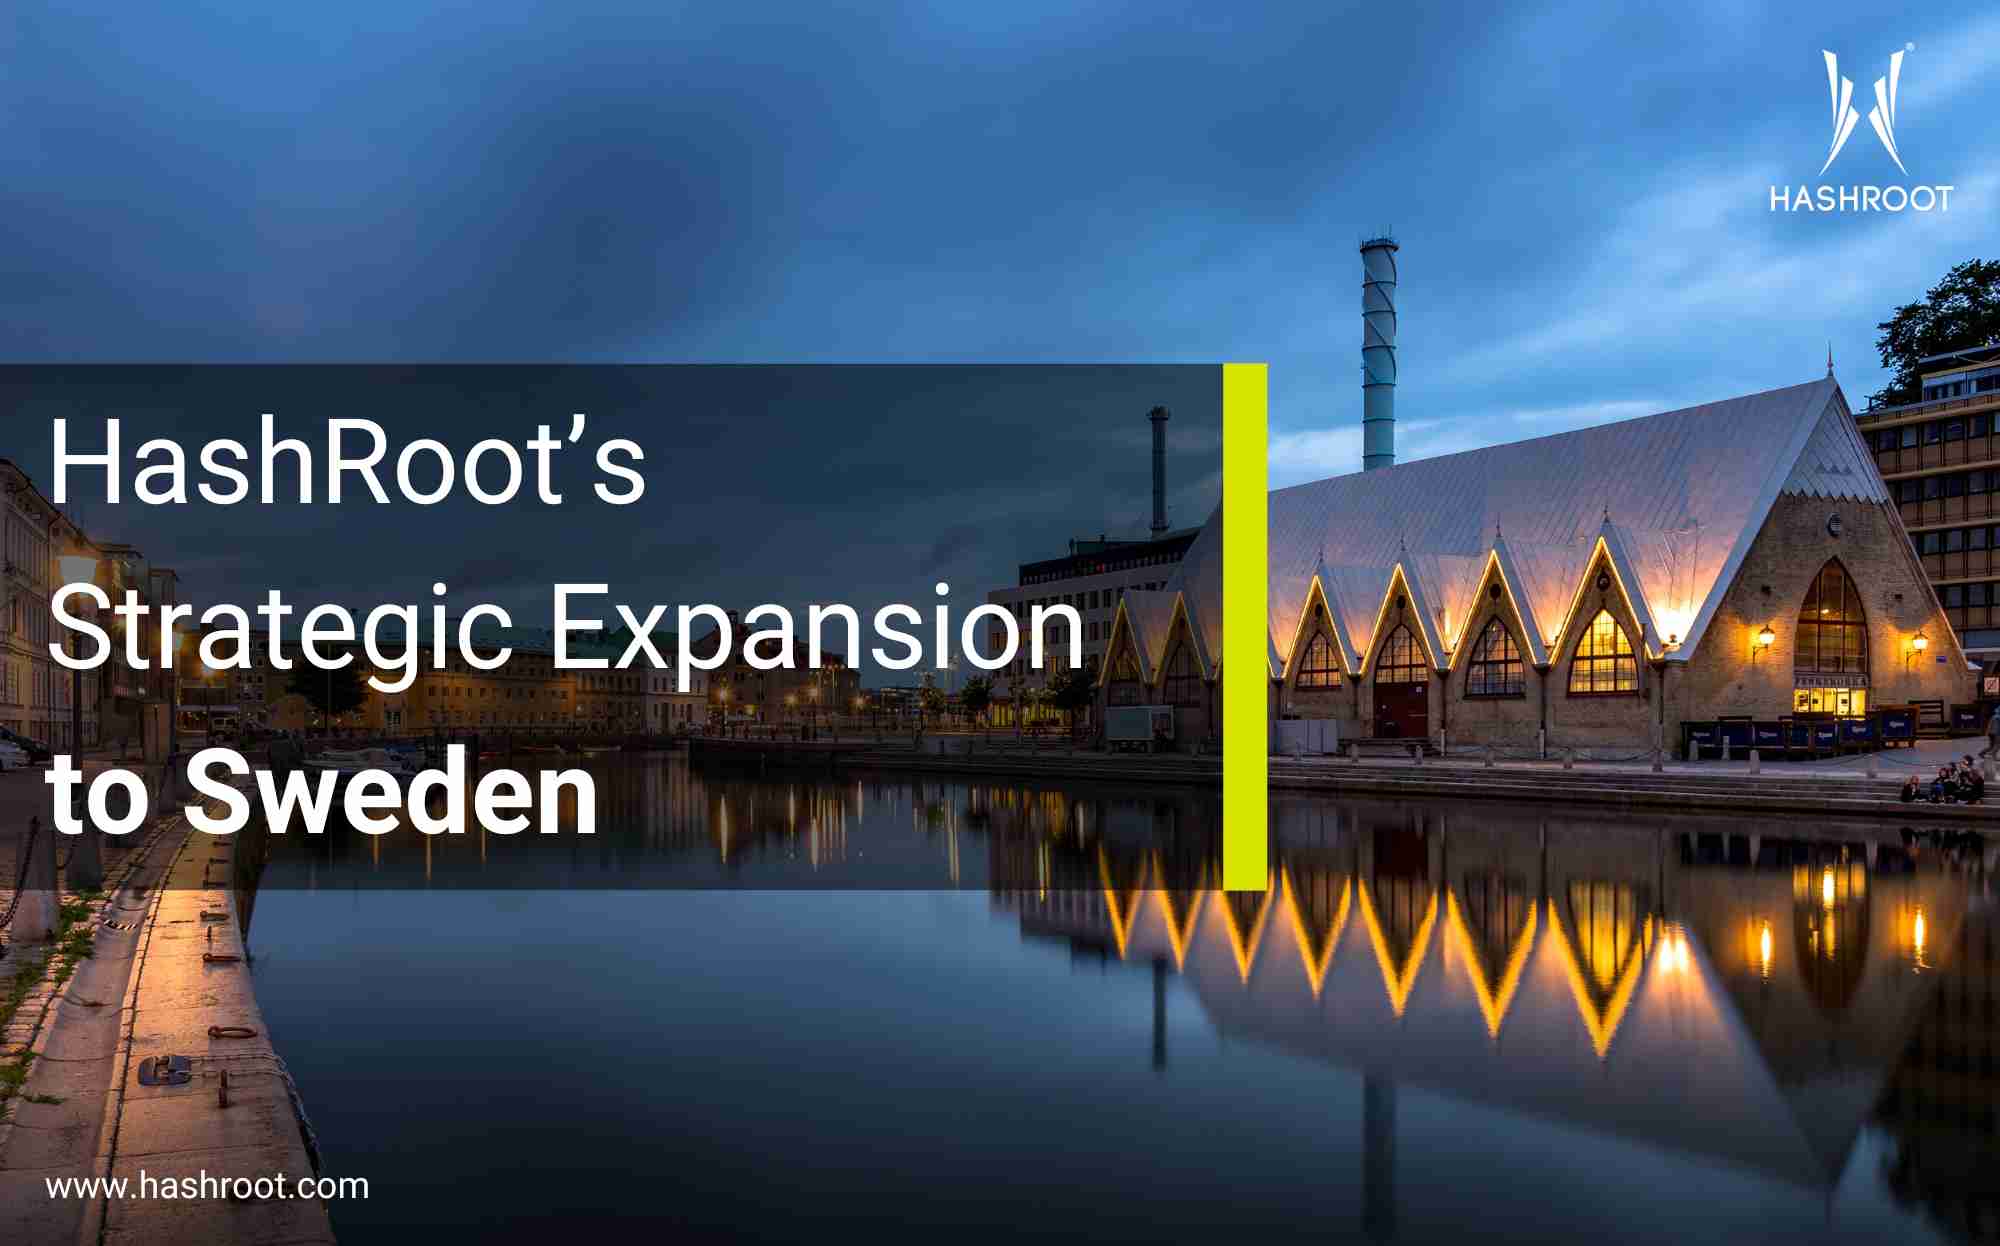 HashRoot’s Strategic Expansion to Sweden